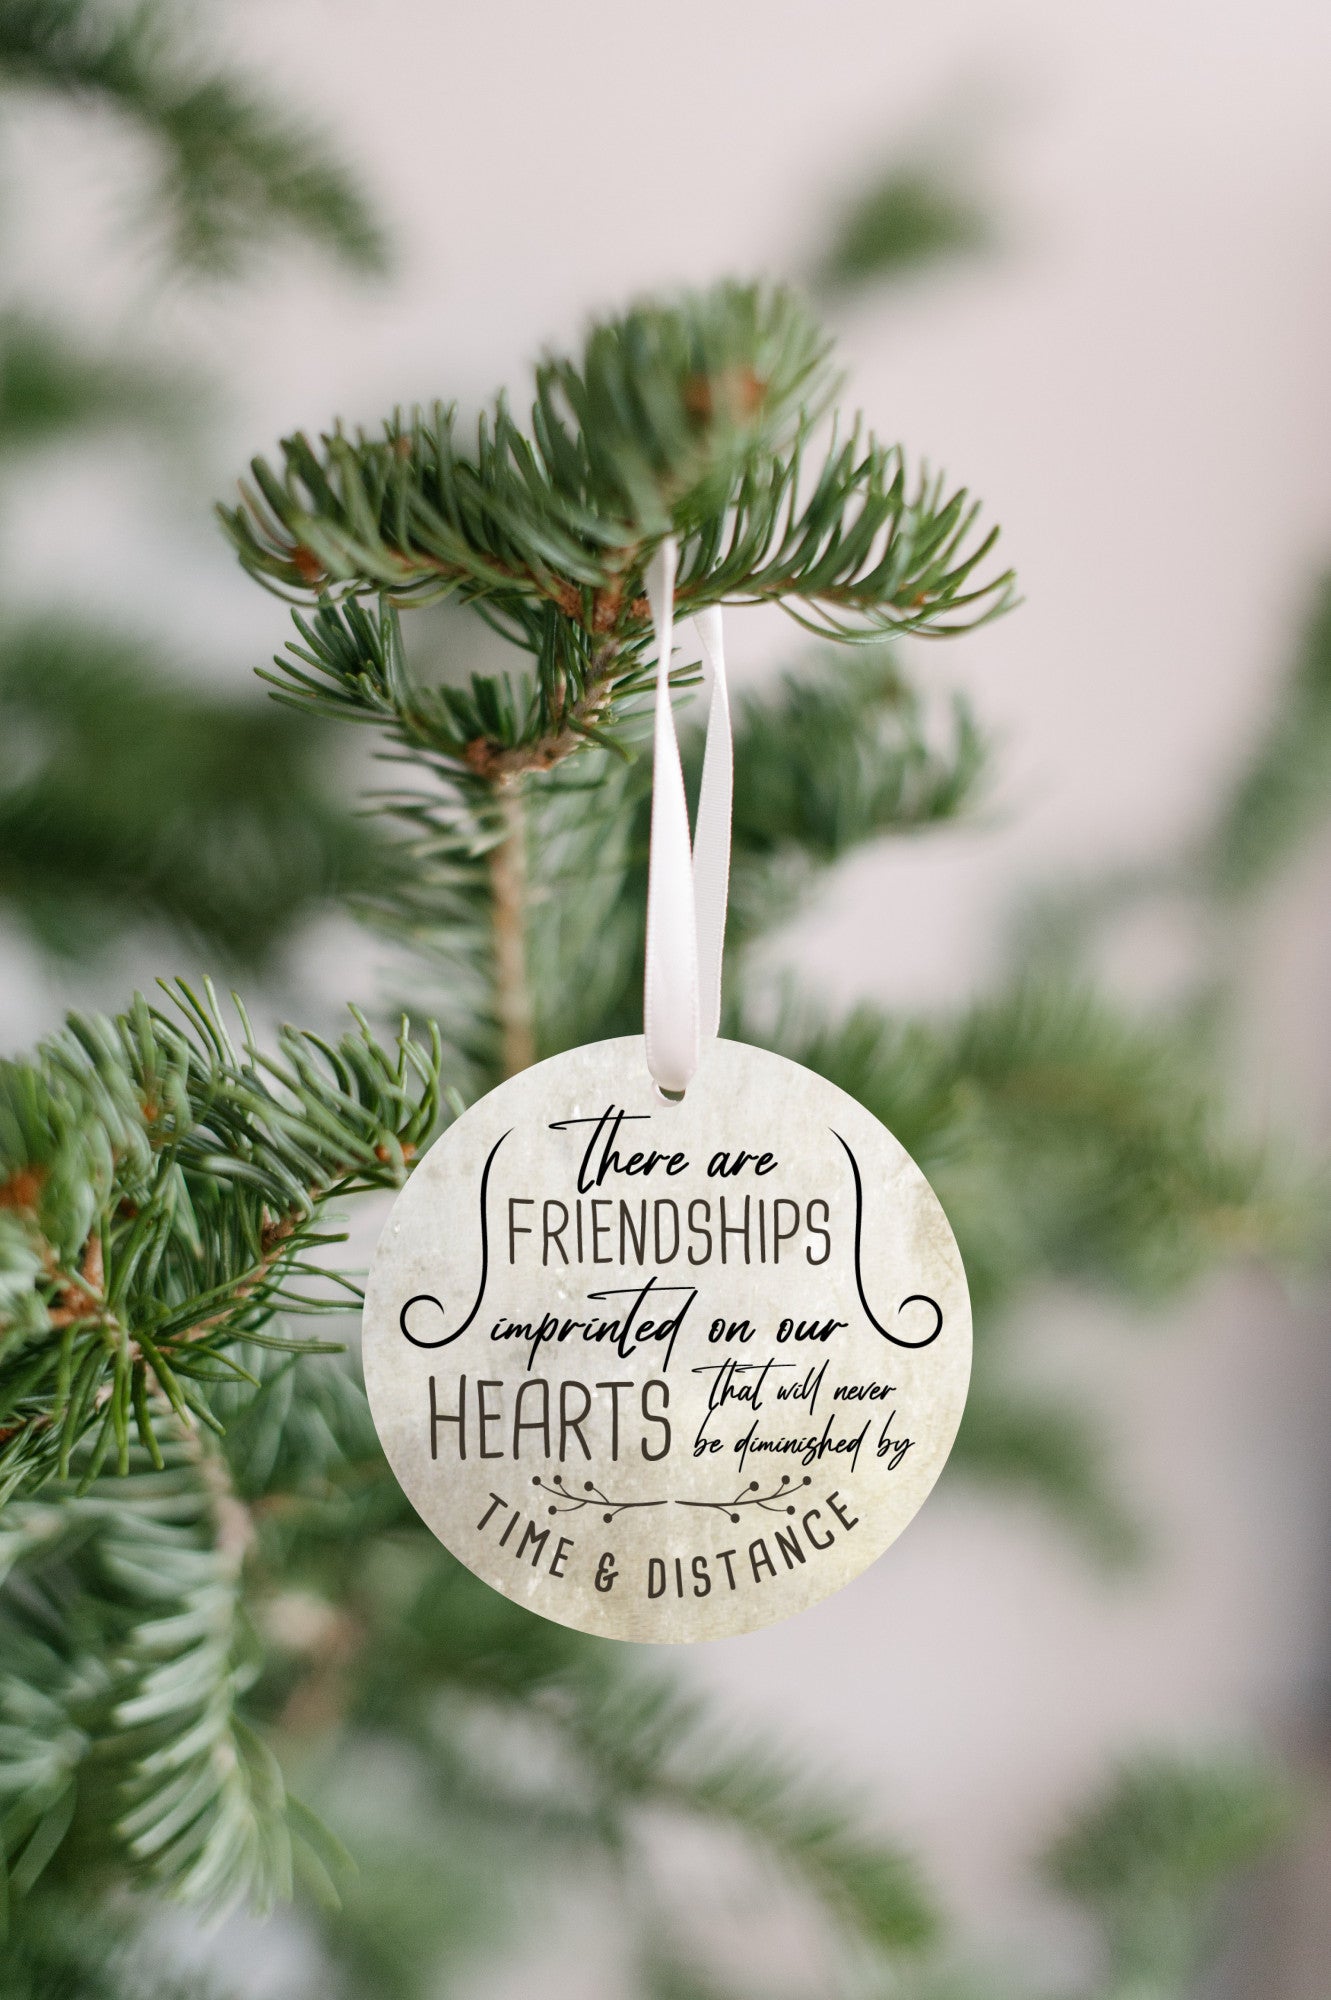 Friends imprinted on our hearts Ornament